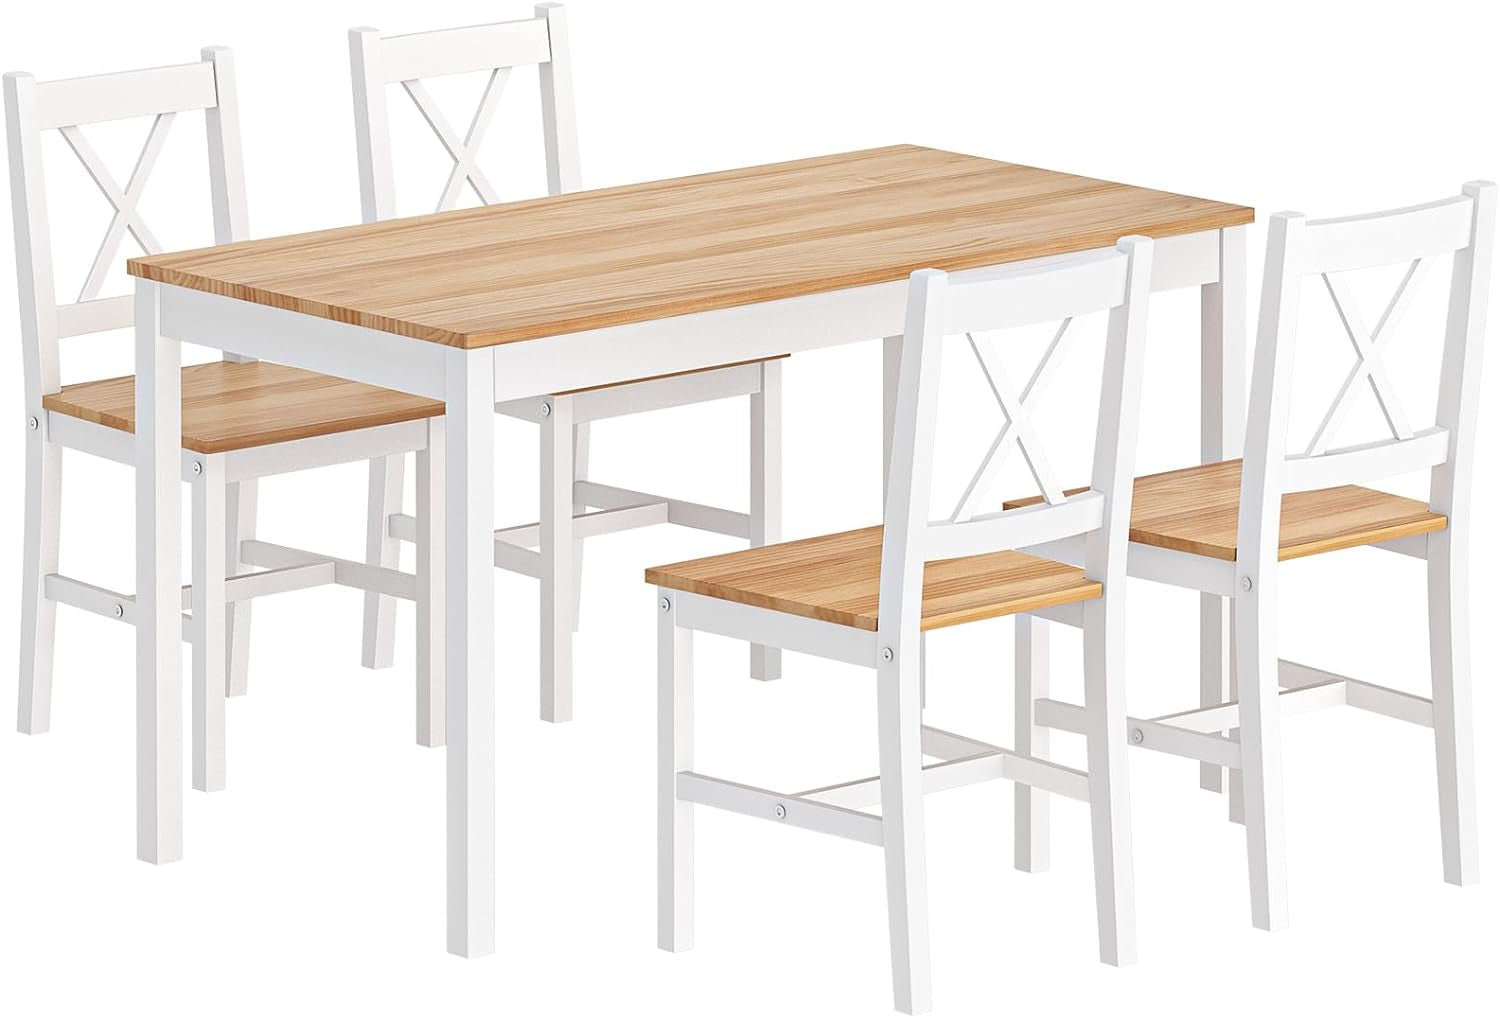 4-Person Dining Table Set 5 Pieces, Wood Kitchen Table Set with 4 Chairs for Kitchen Dining Room Restaurant, White&Oak